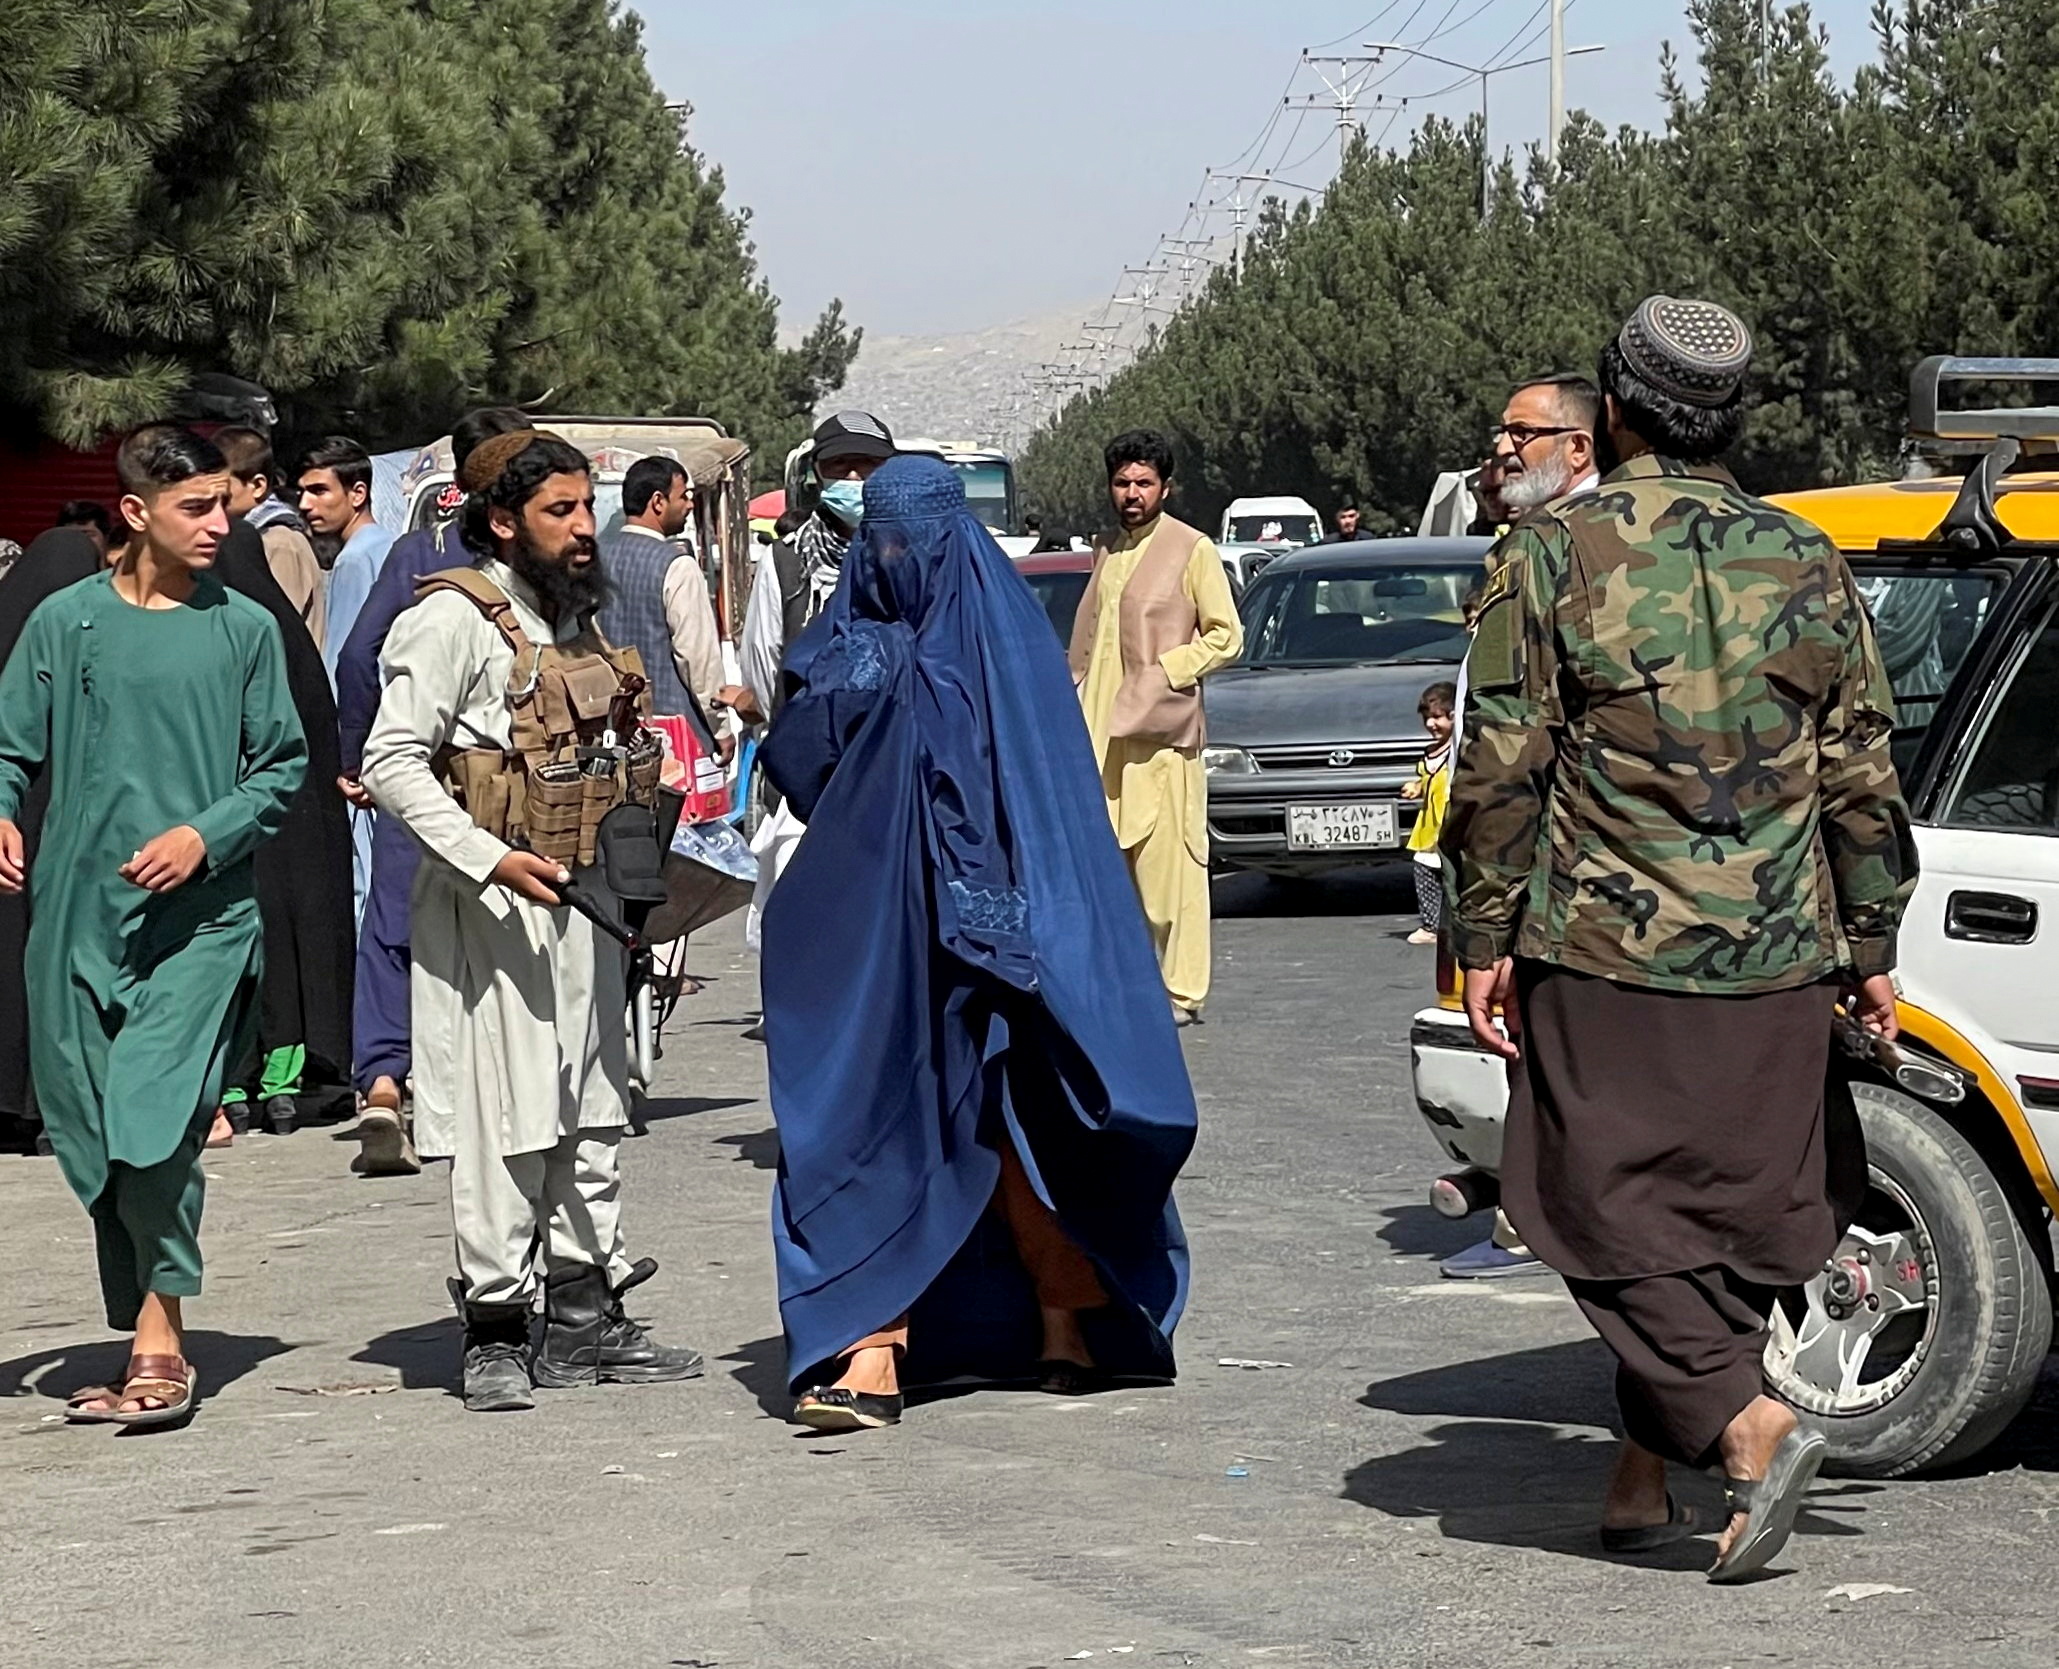 Taliban forces block the roads around the airport, while a woman with Burqa walks passes by, in Kabul